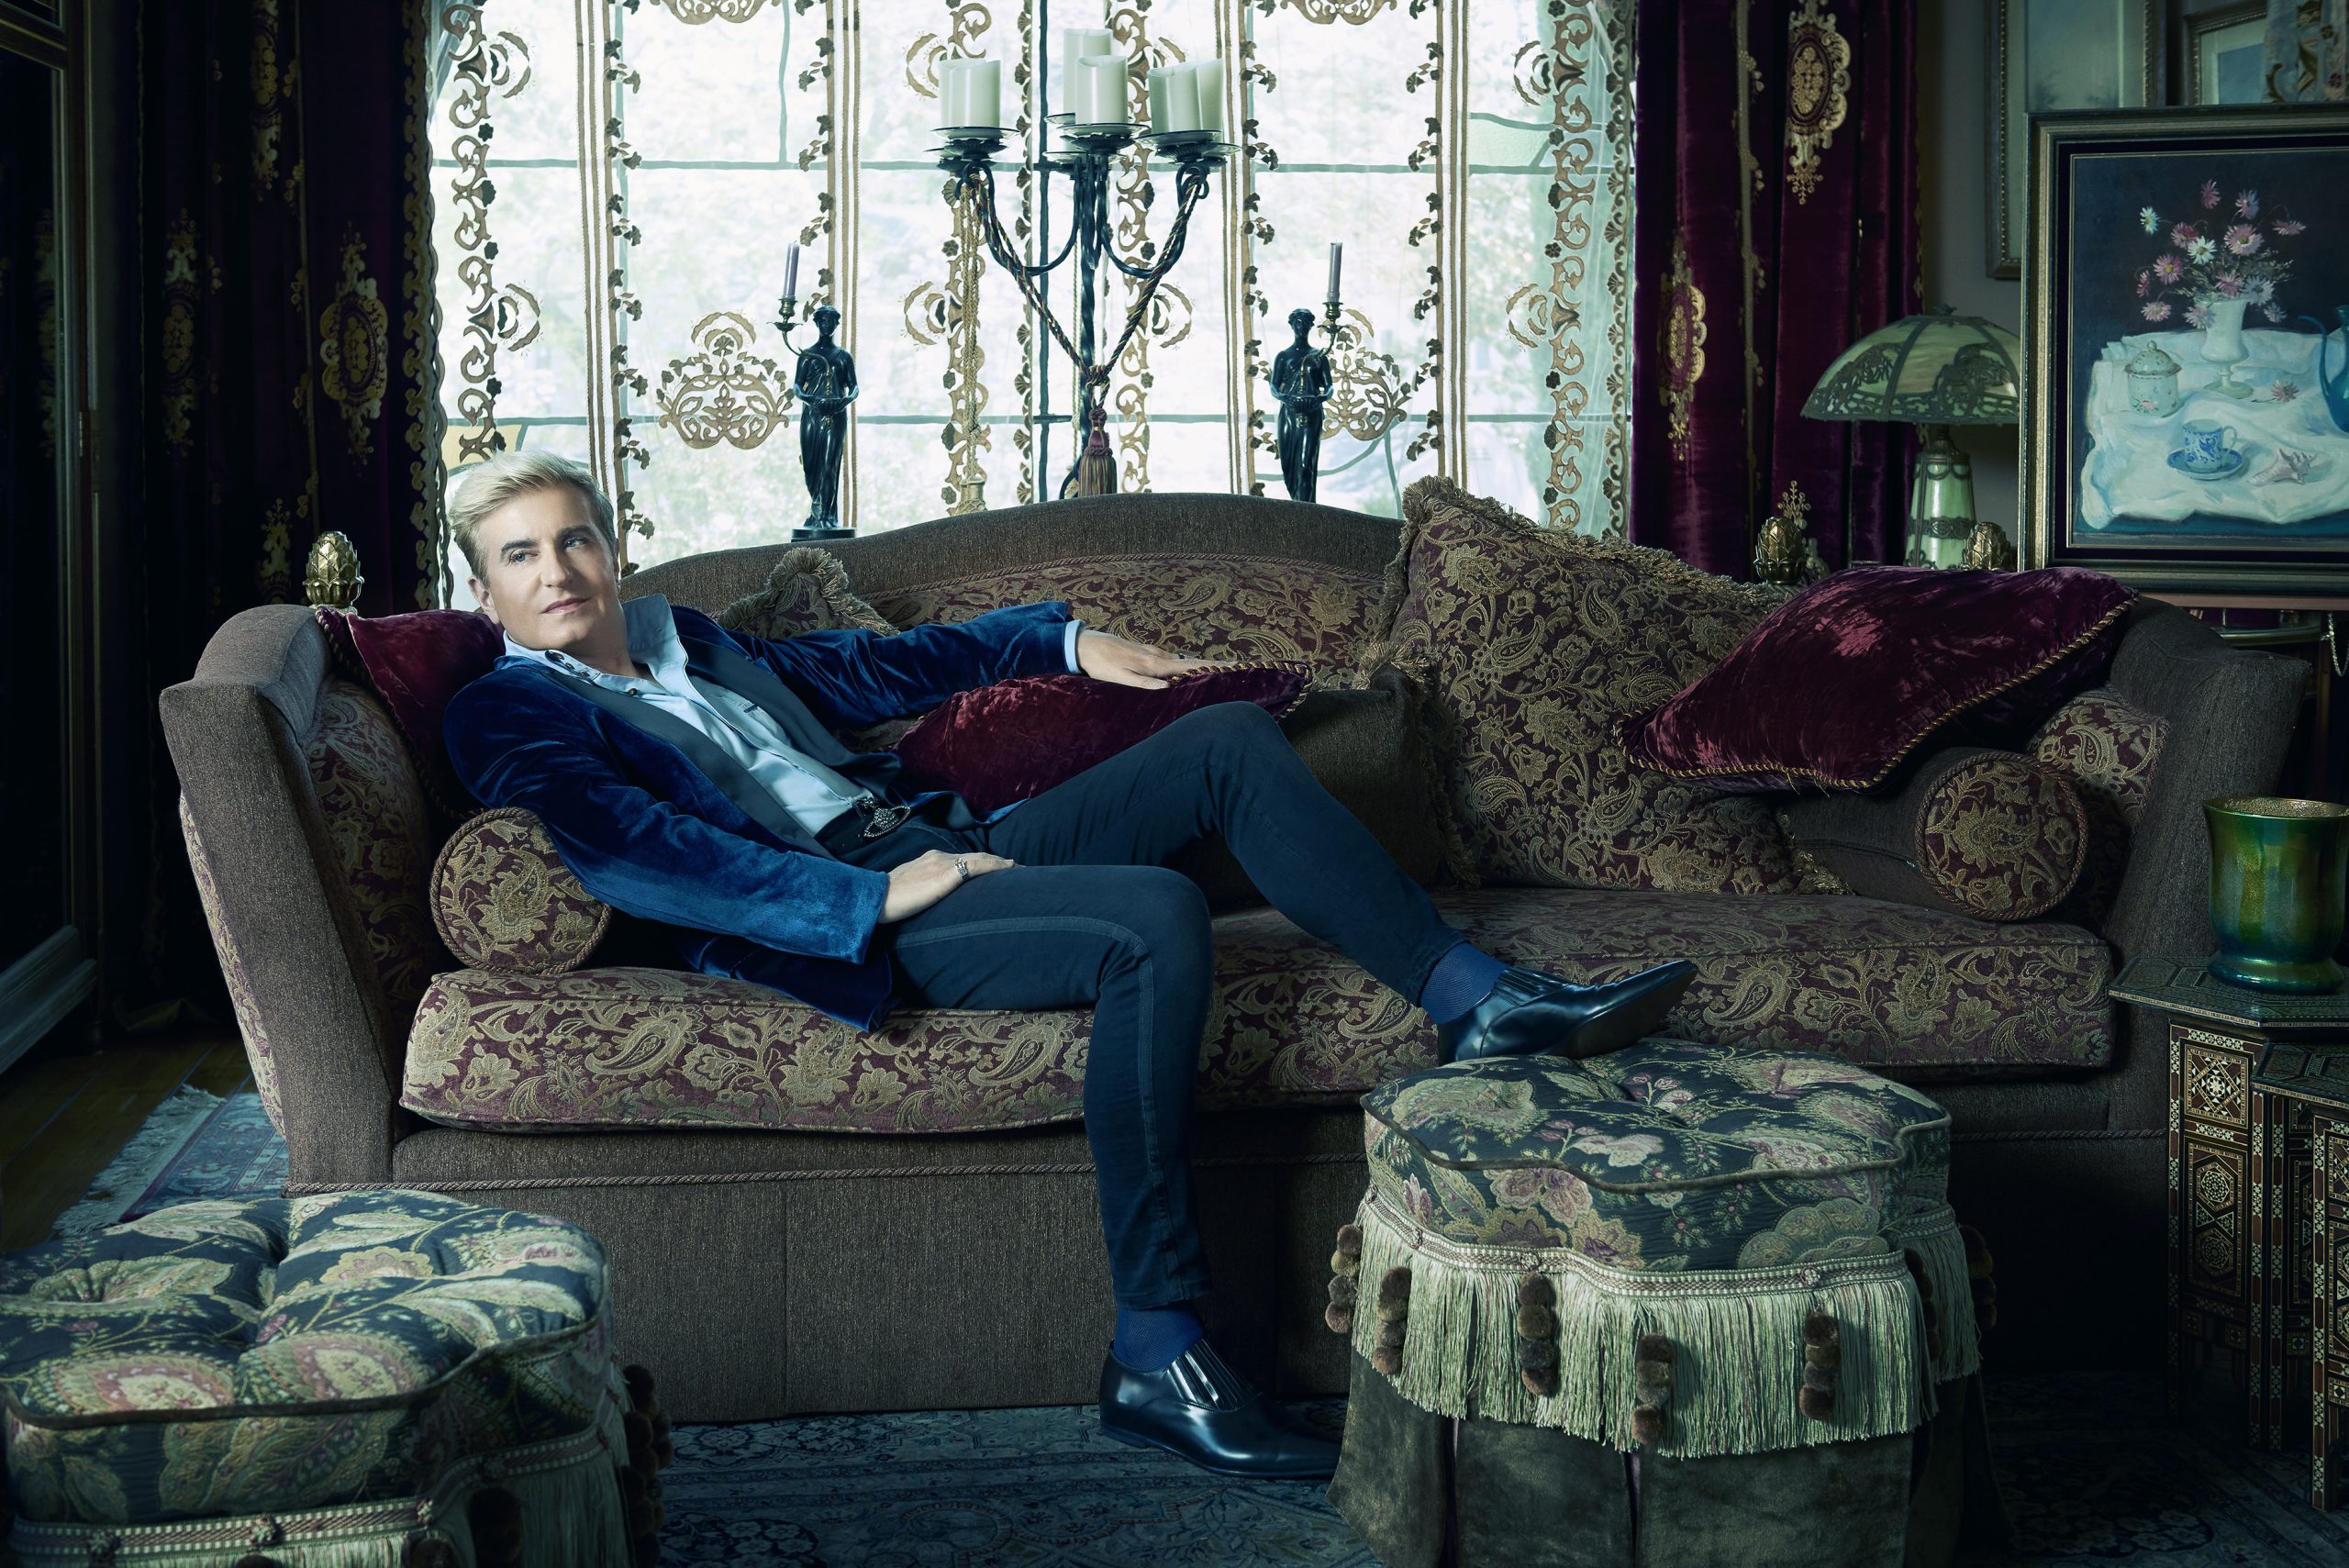 Image of Jean-Yves Thibaudet on a couch.